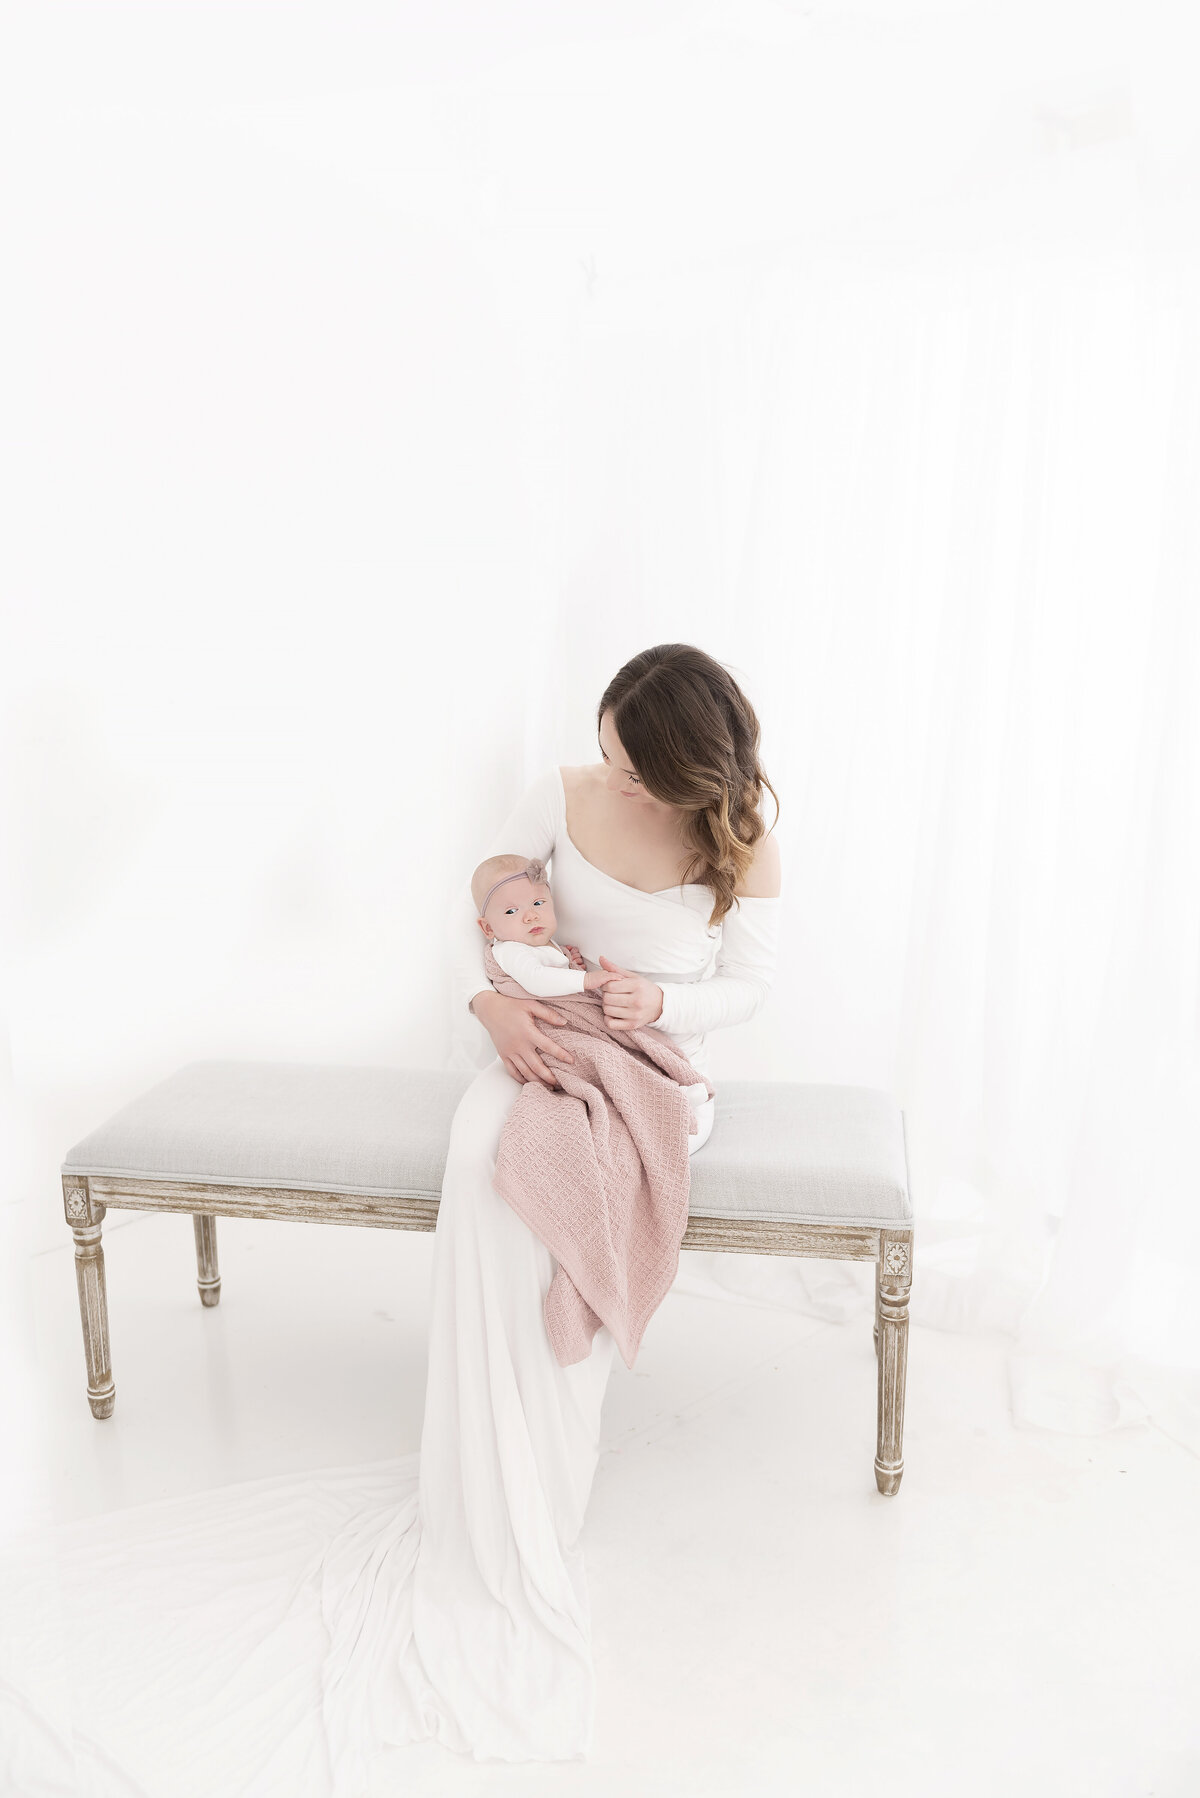 A new mother in a white dress sits on a bench in a white studio playing with her newborn baby wrapped in a pink blanket